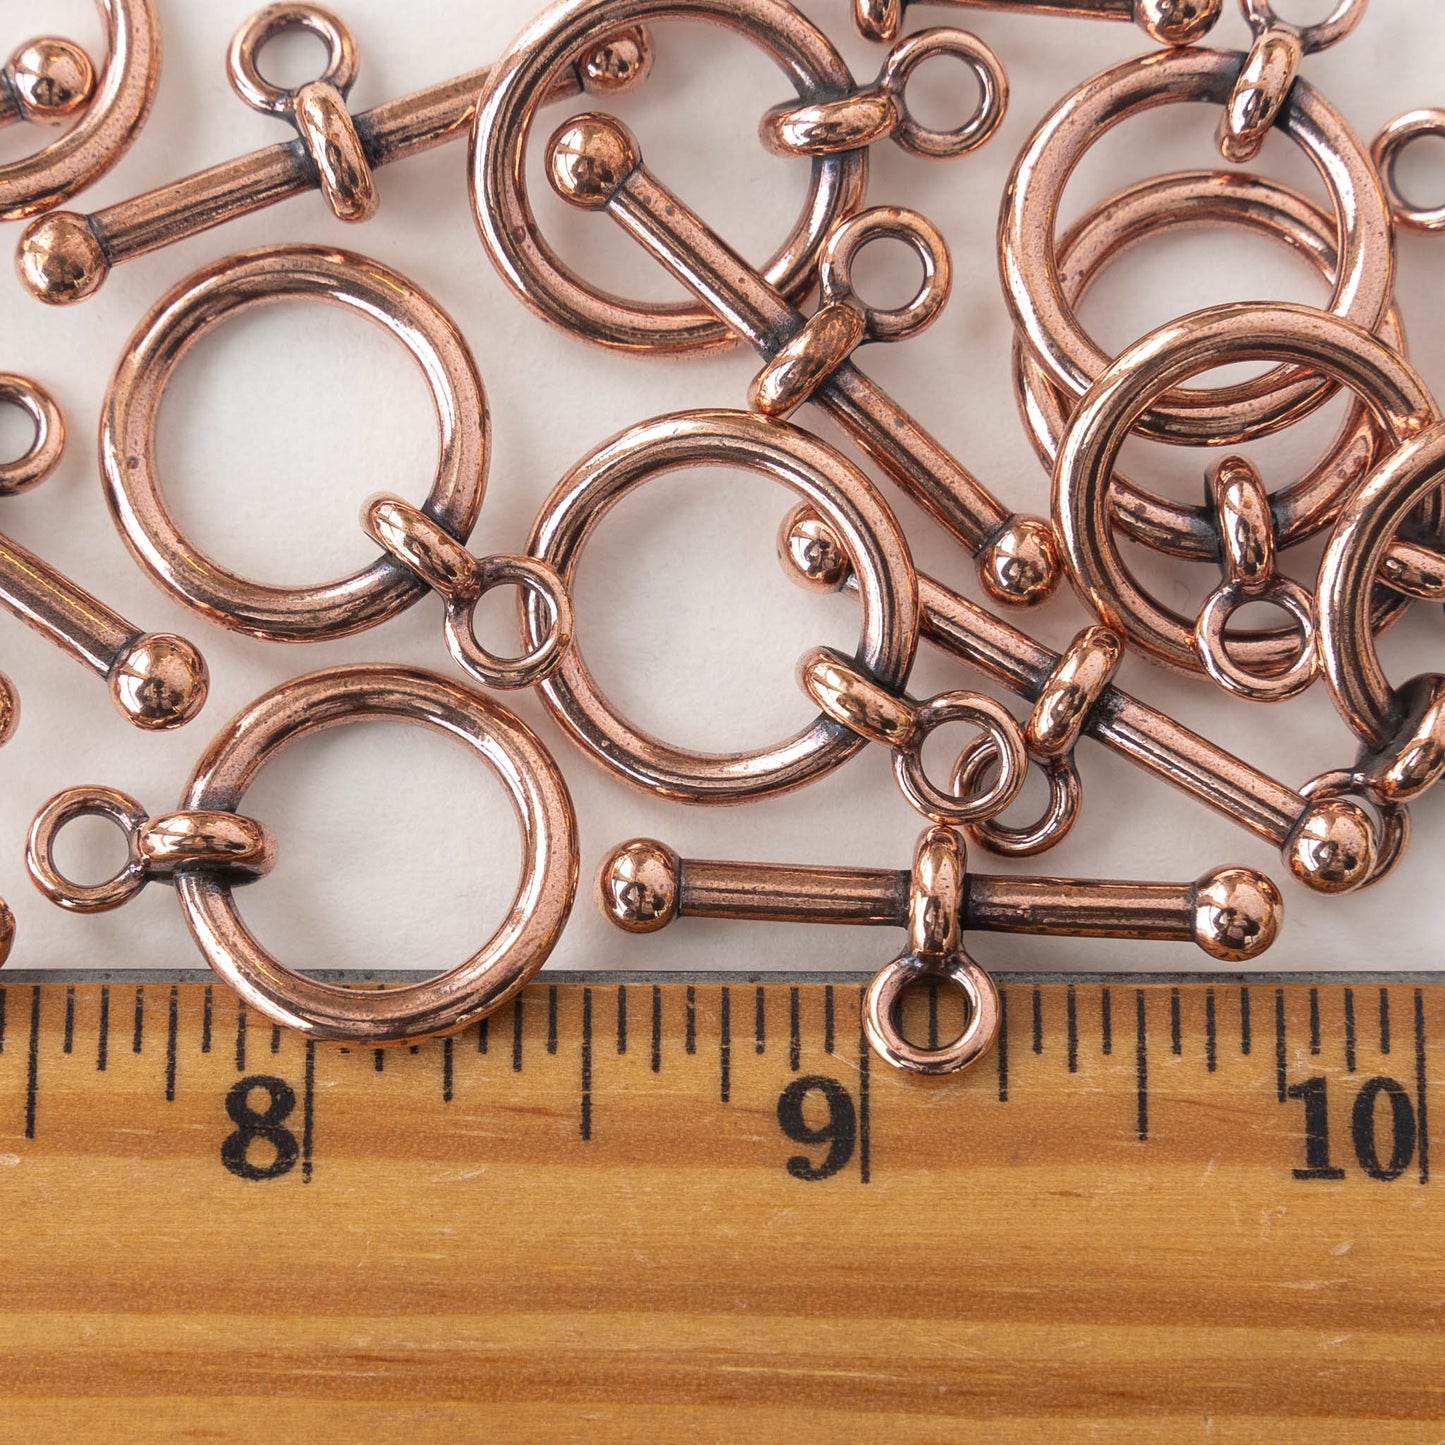 Large Toggle Clasp - Antiqued Copper Finish - 1 Clasp